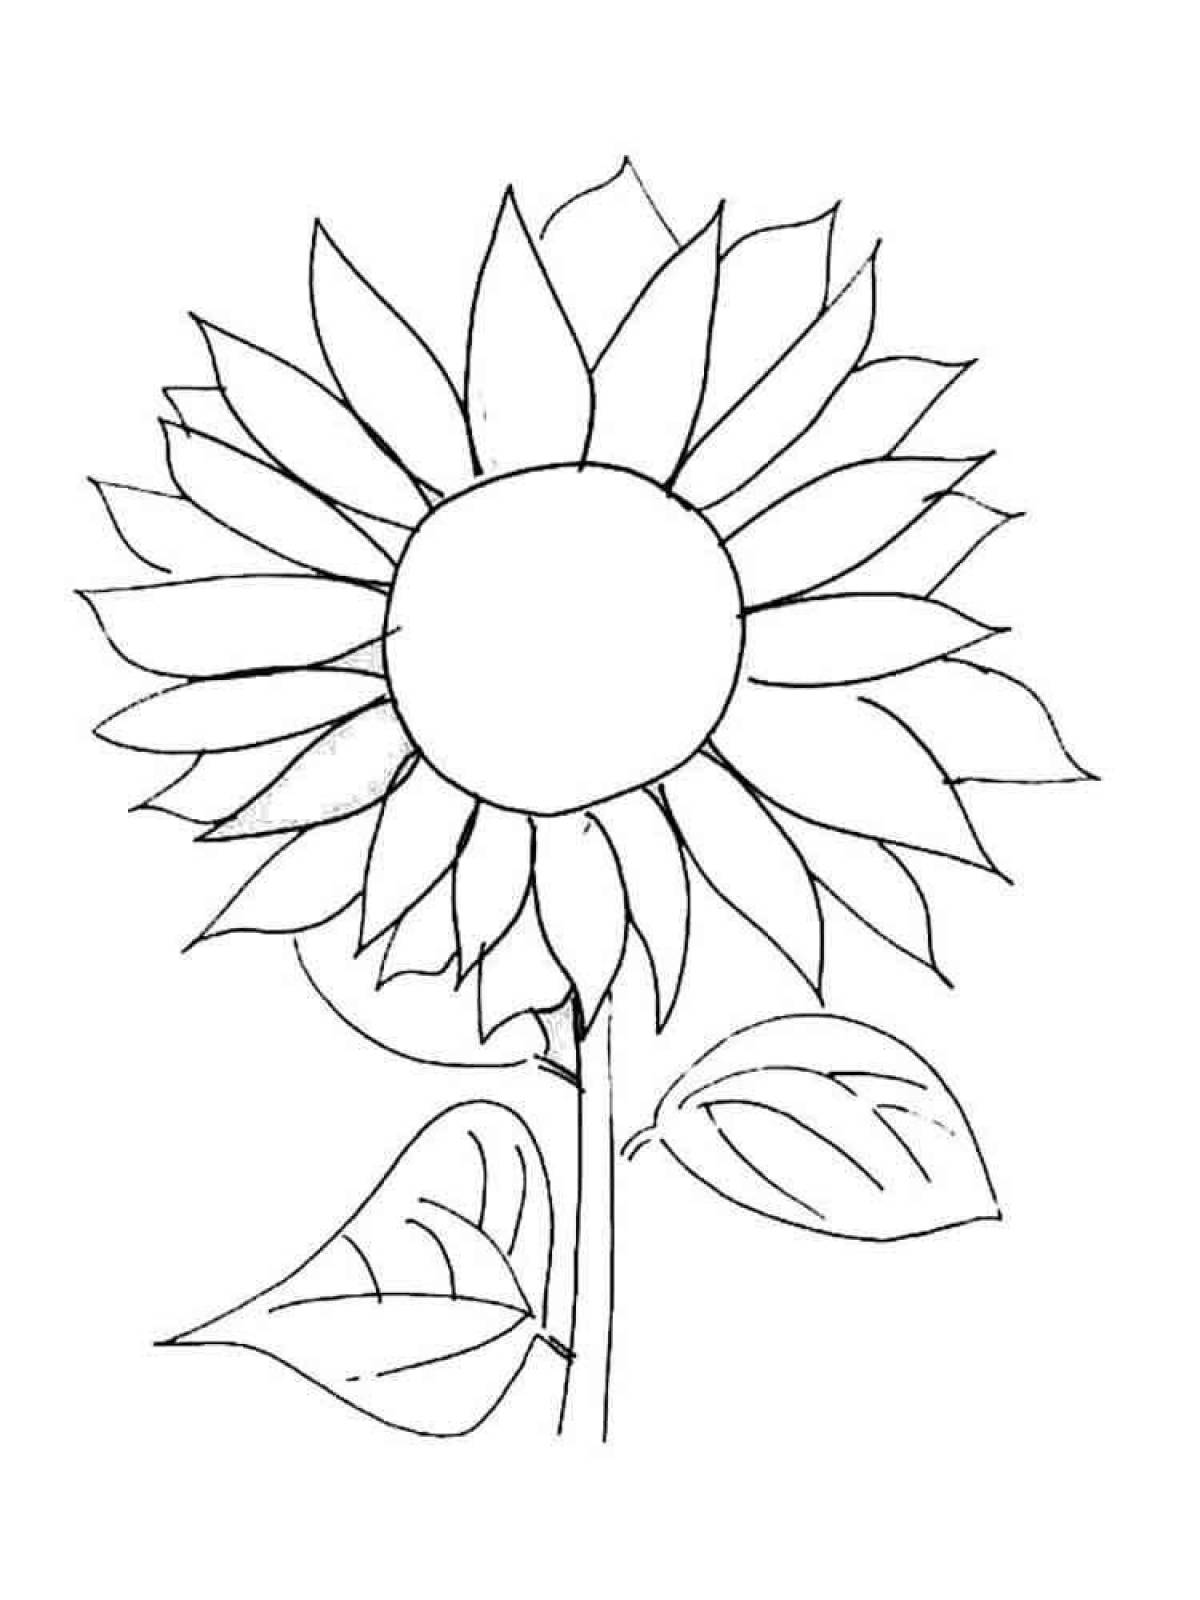 Sunflower coloring book for kids